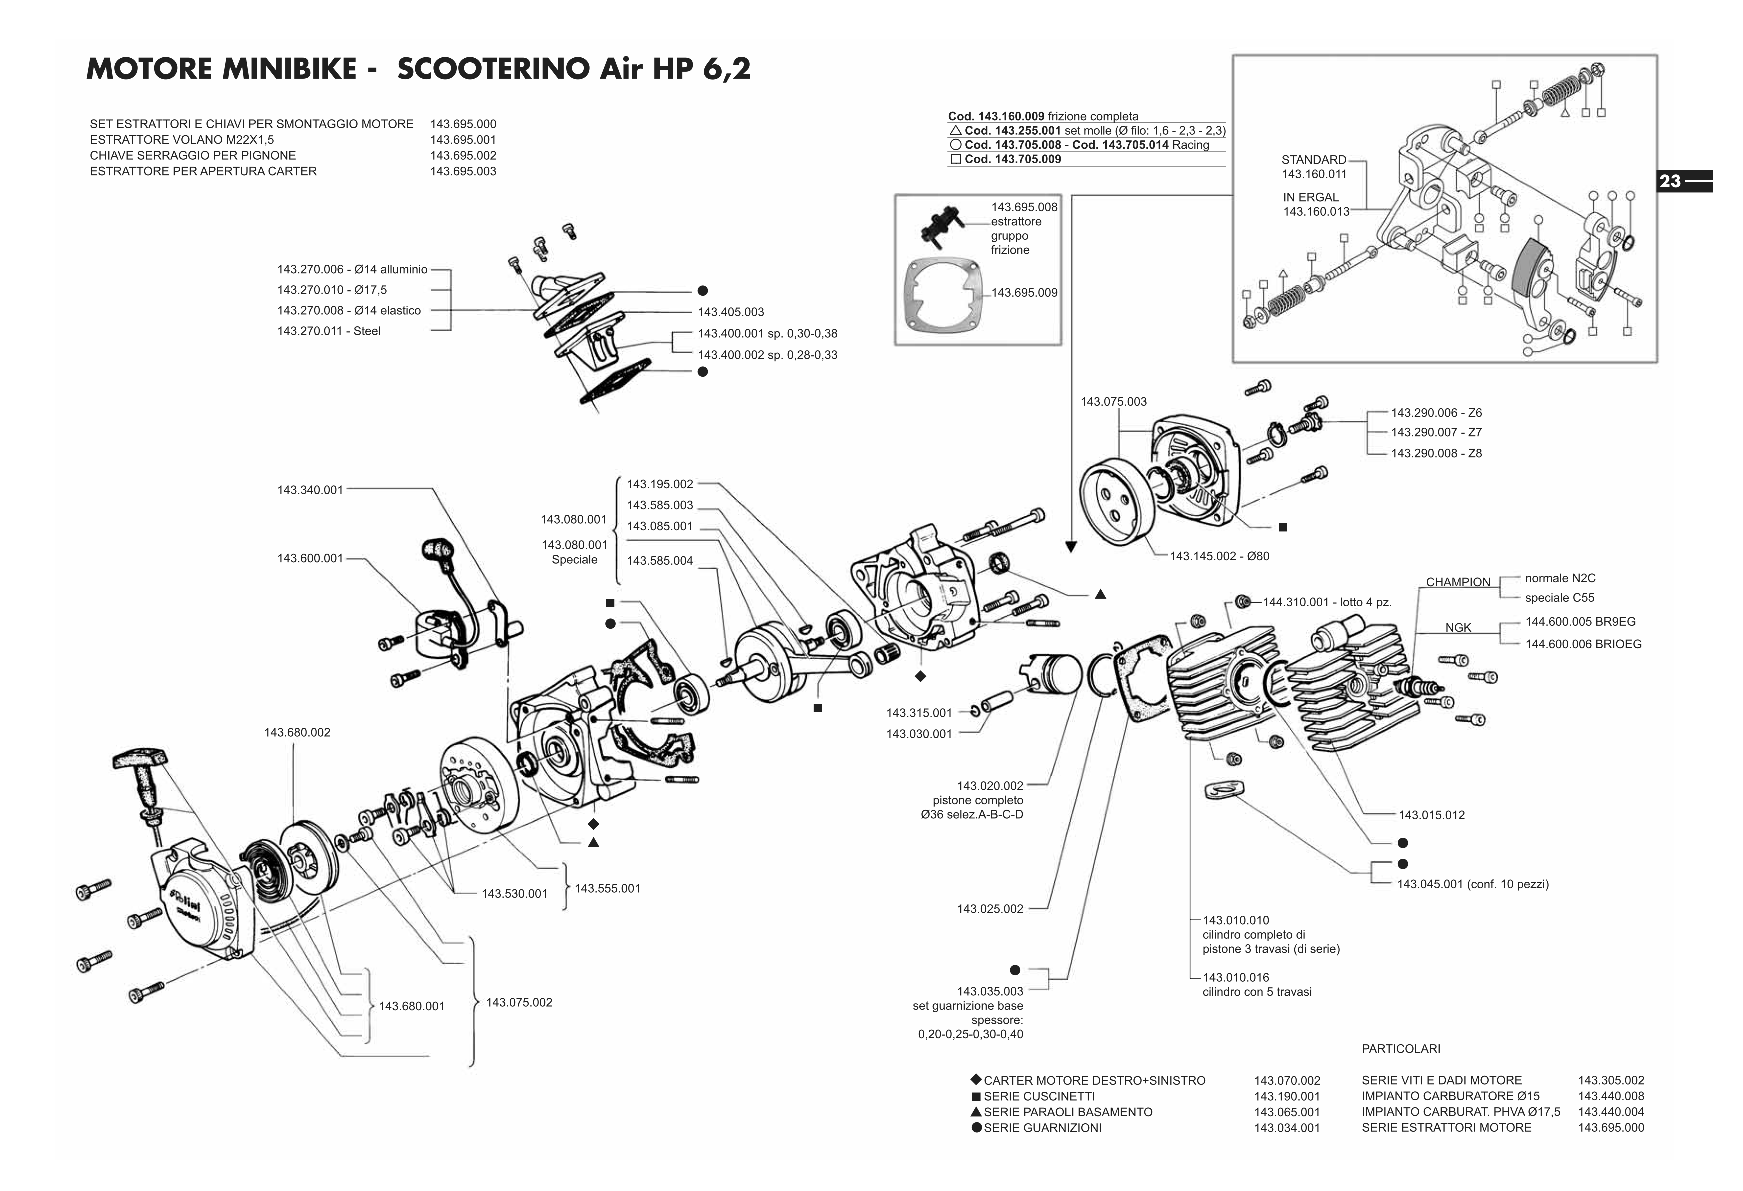 Exploded view Motore (HP 6,2)